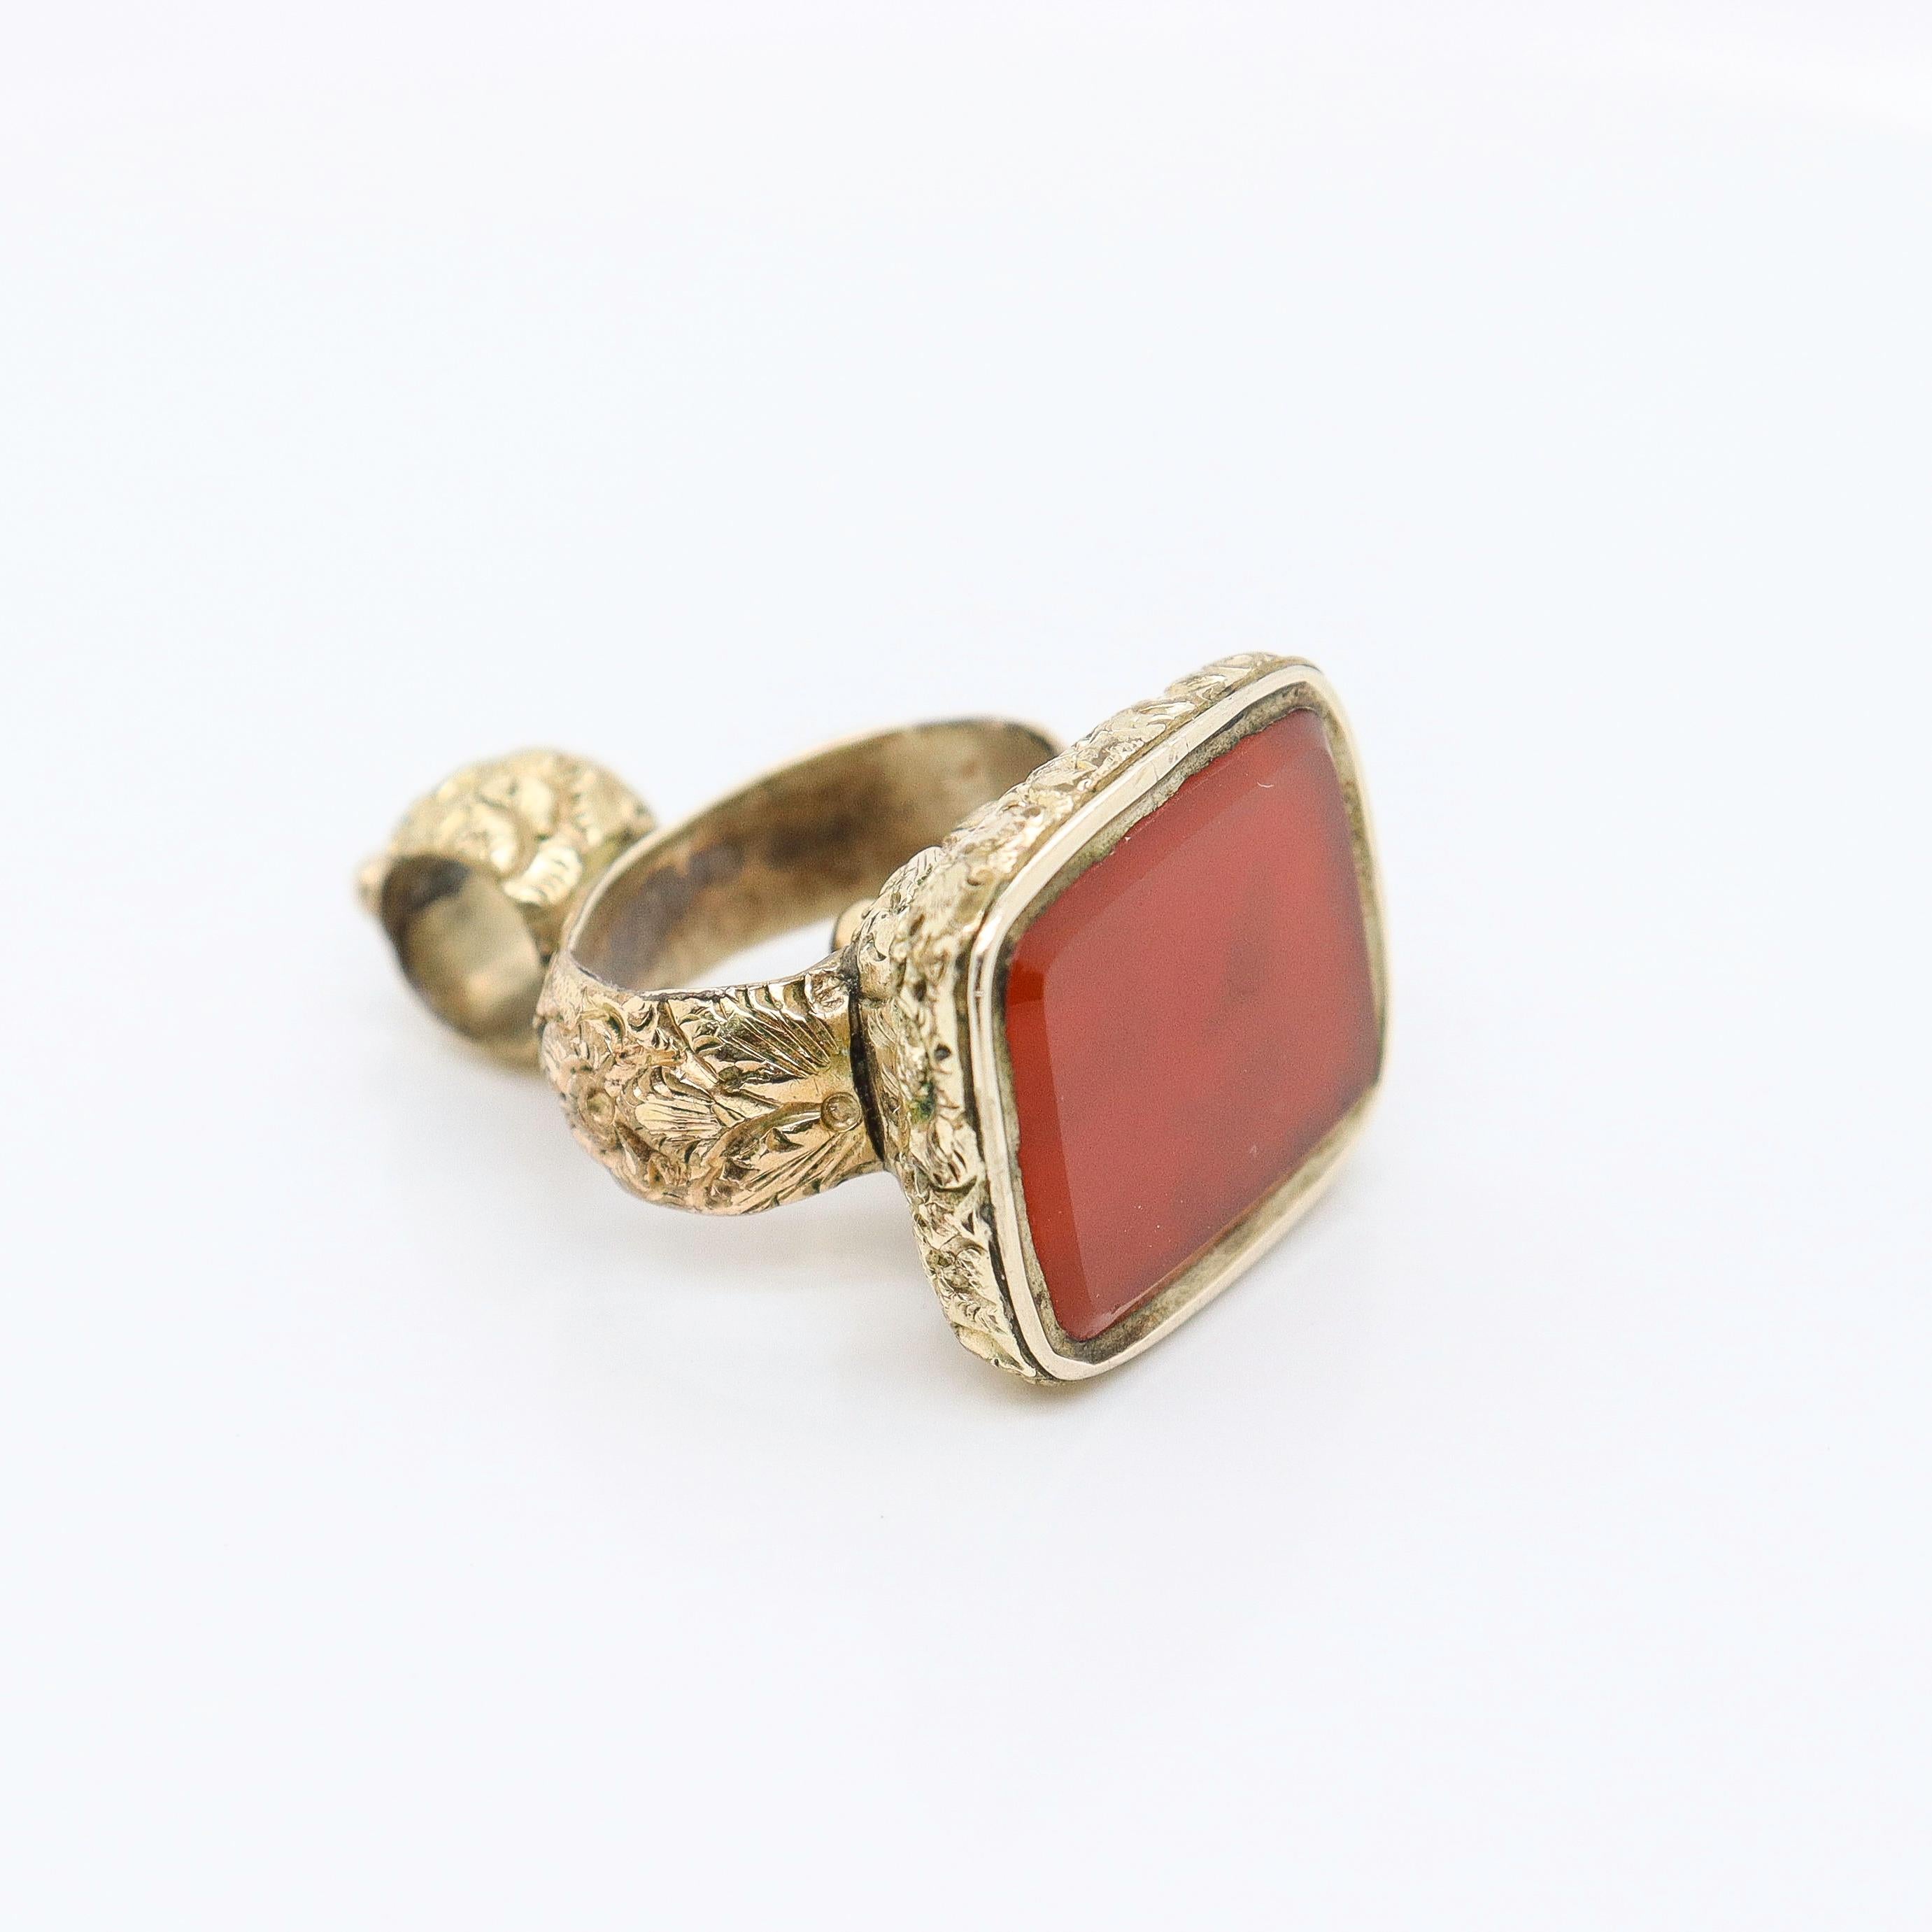 Antique Gold Filled Victorian Watch Fob with Carnelian Cabochon For Sale 1